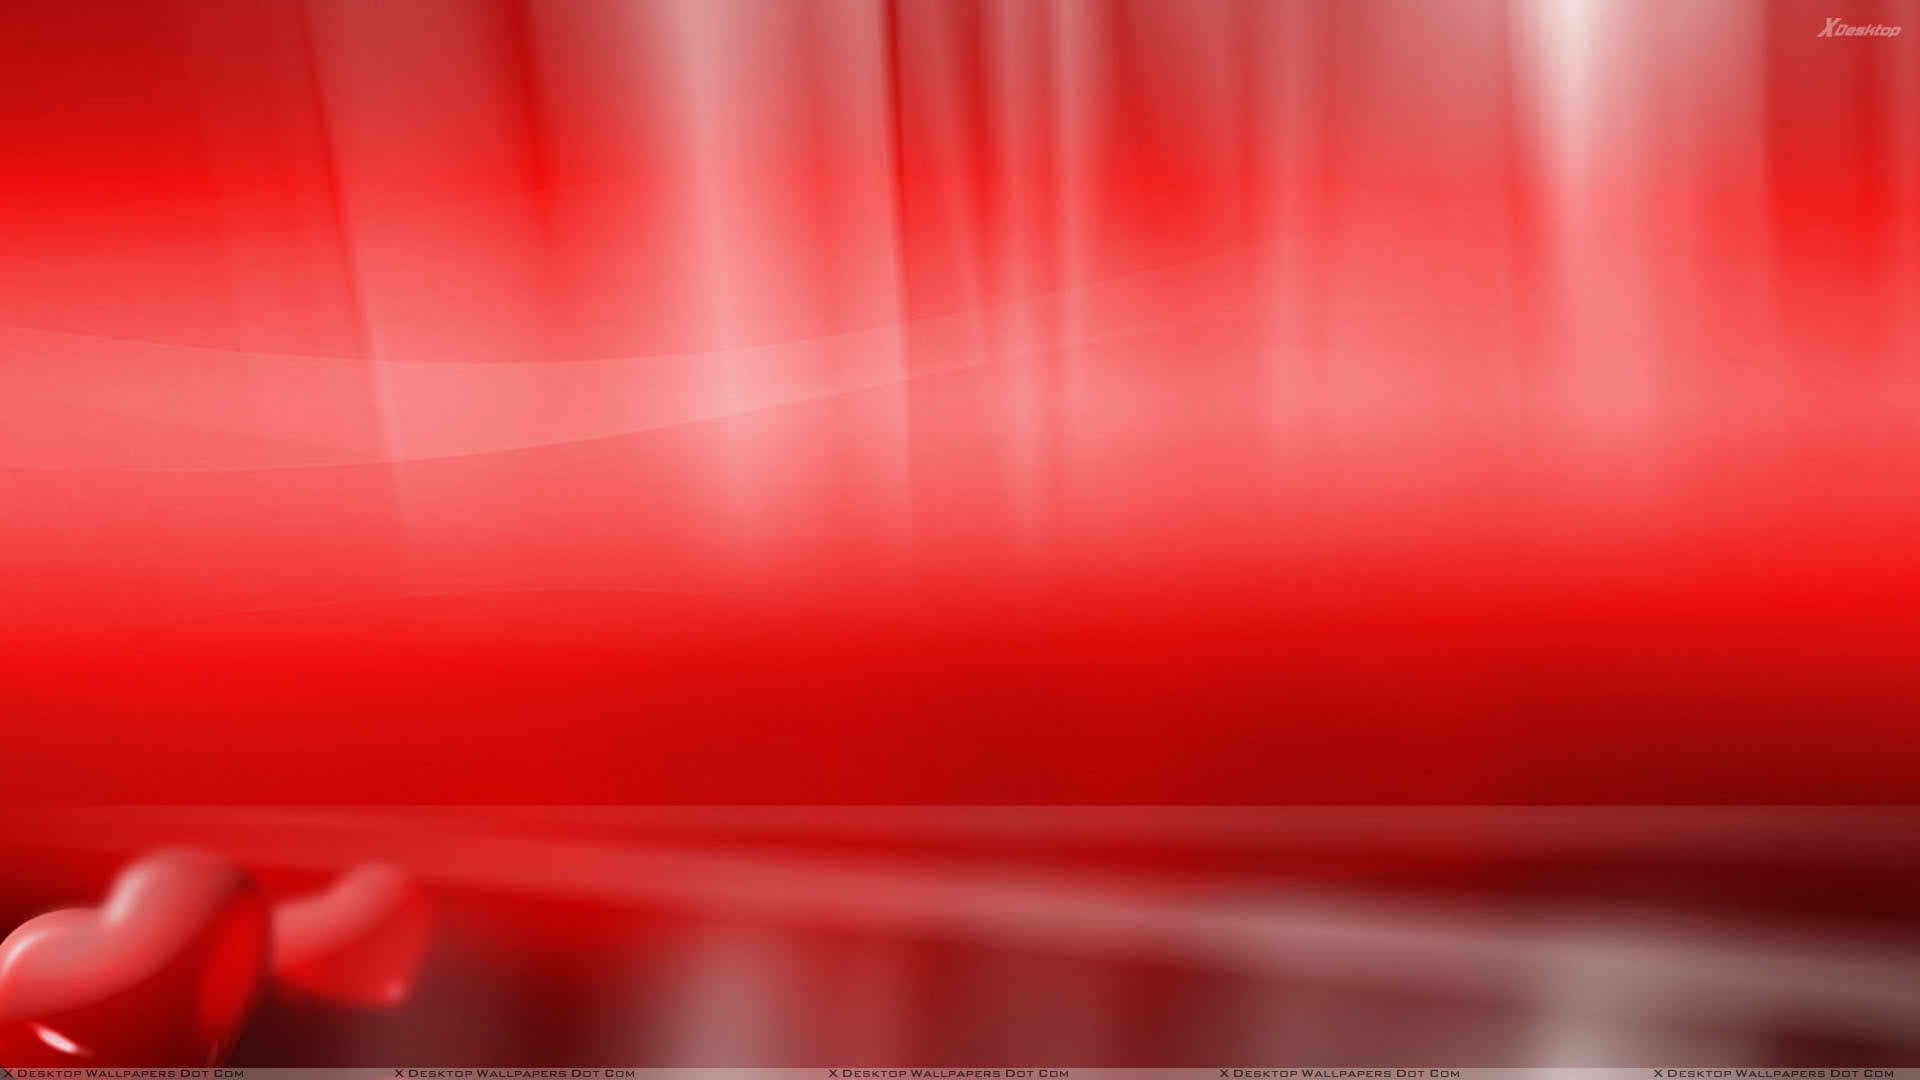 red hd lovely background image